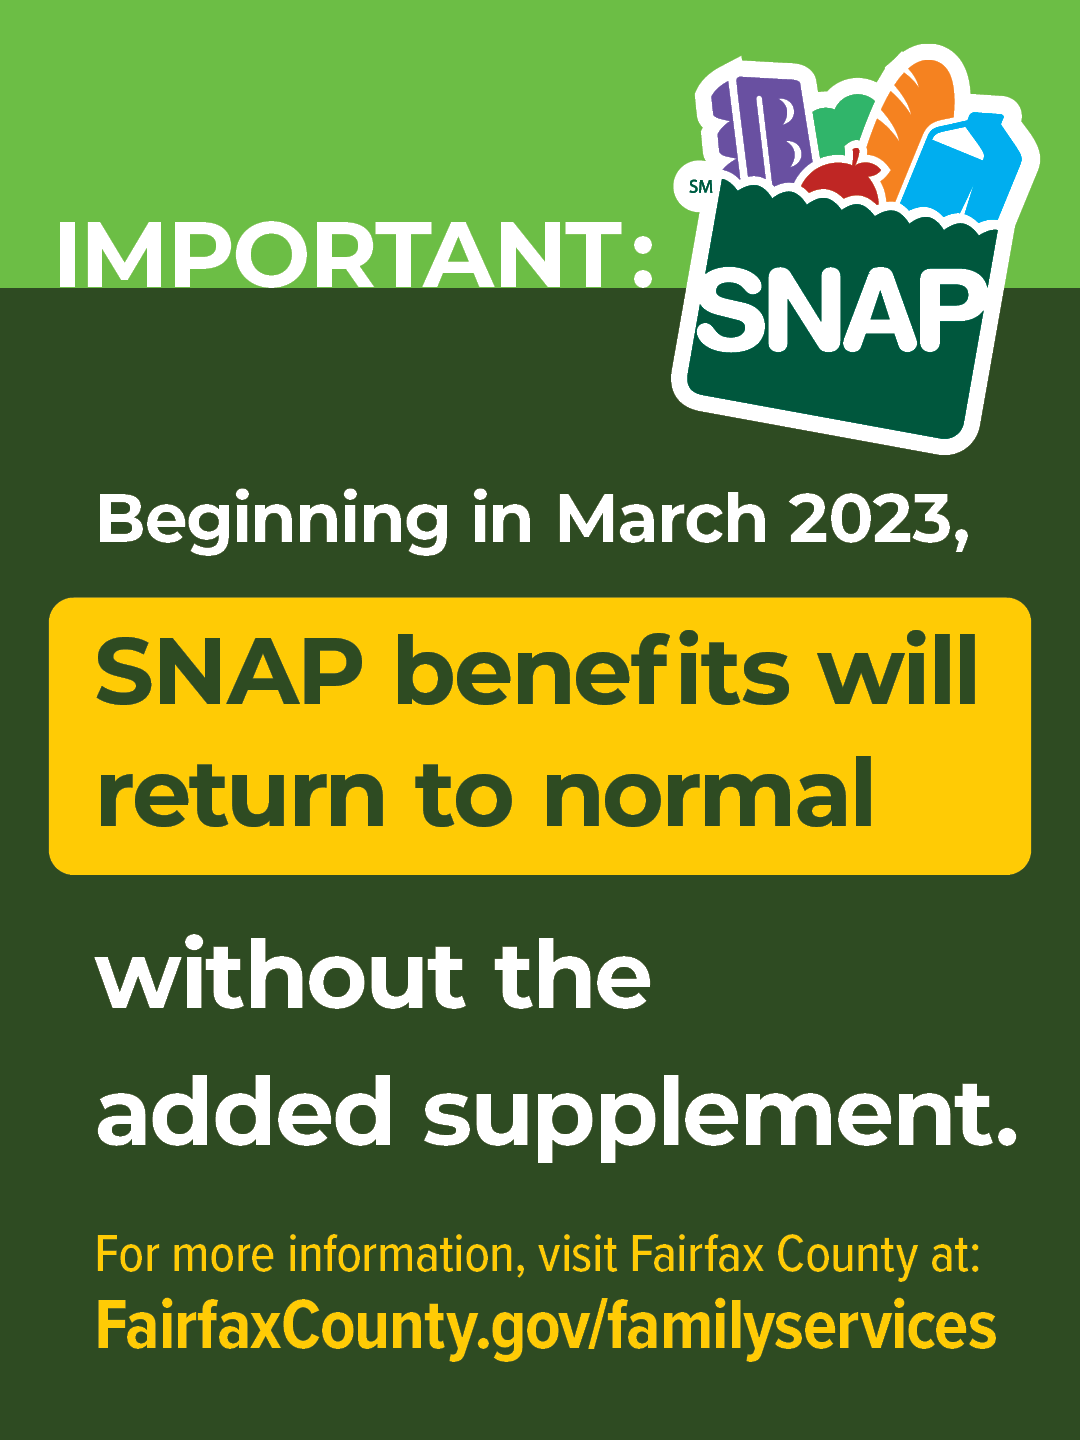 Changes to SNAP Benefits Family Services